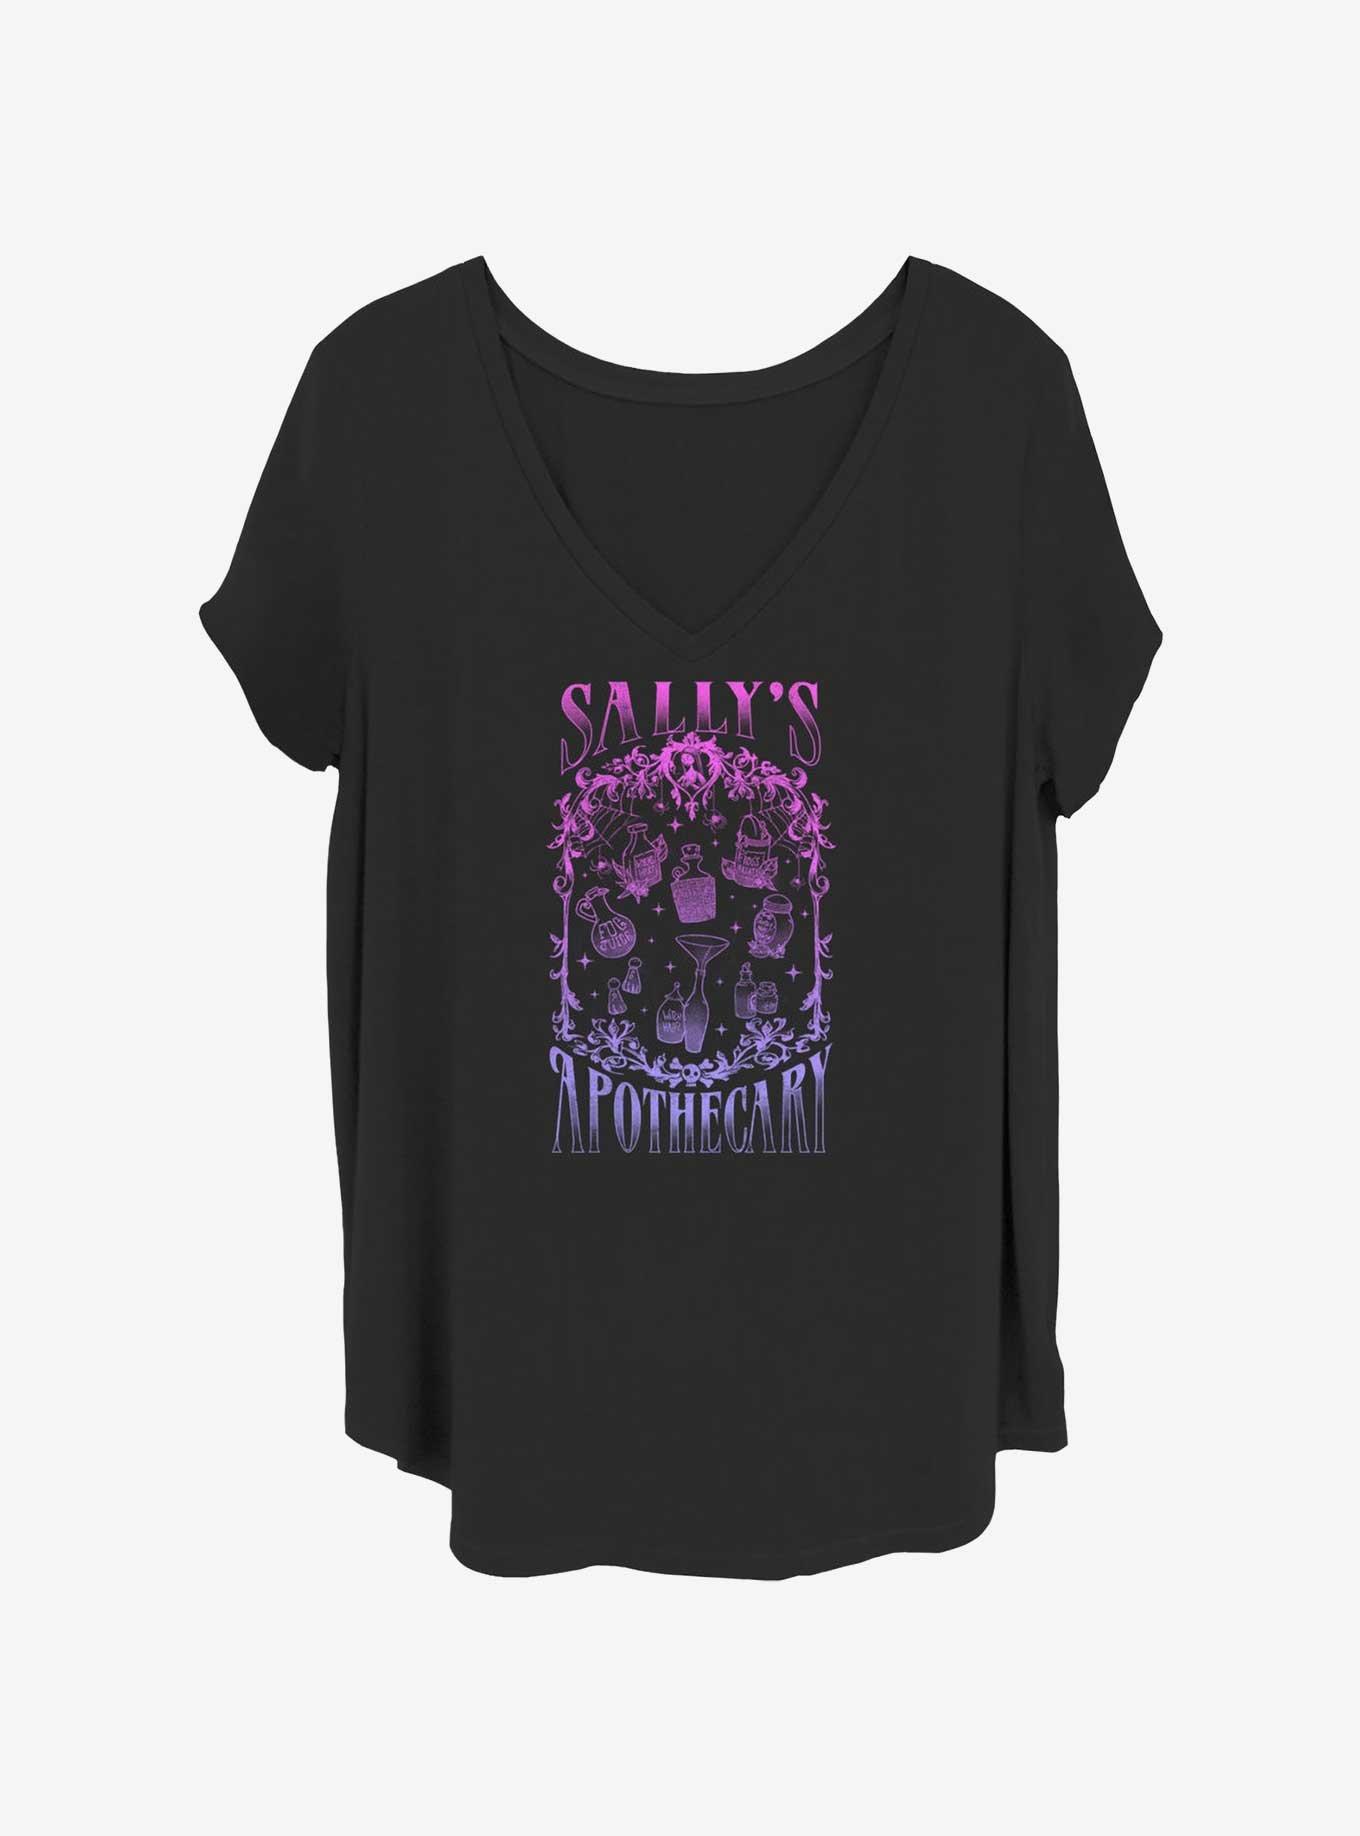 Disney The Nightmare Before Christmas Sally's Apothecary Girls T-Shirt Plus Size, BLACK, hi-res